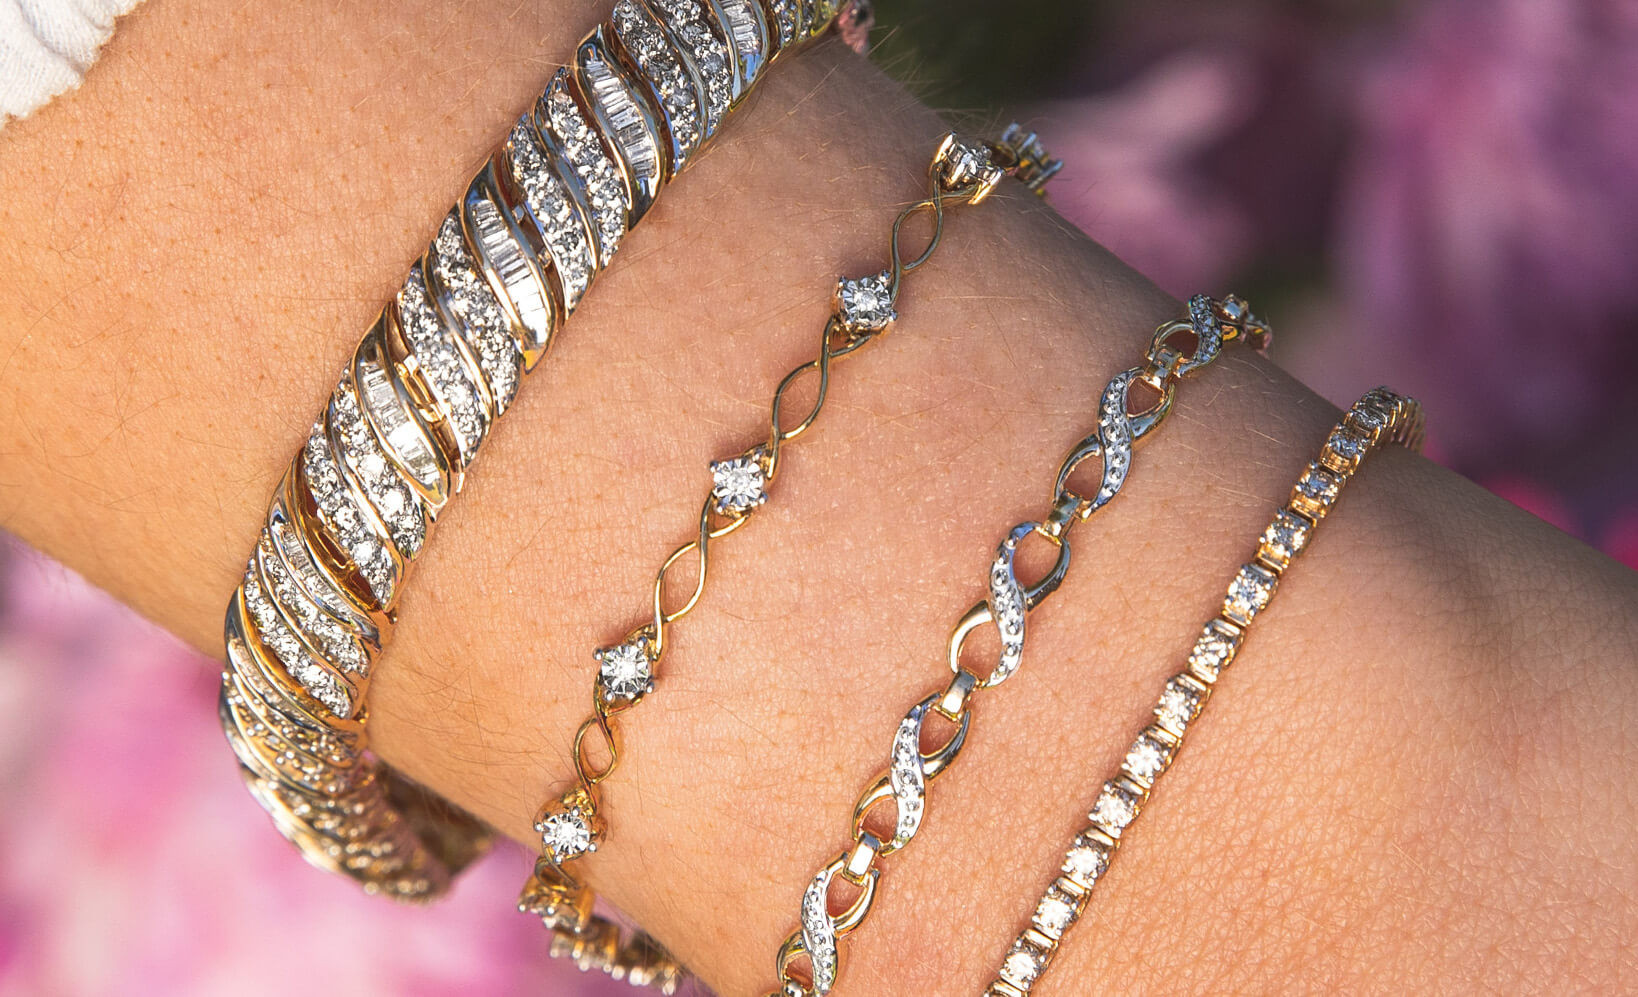 Spring Jewellery Trends To Try As The Weather Heats Up | The Bracelet Stack